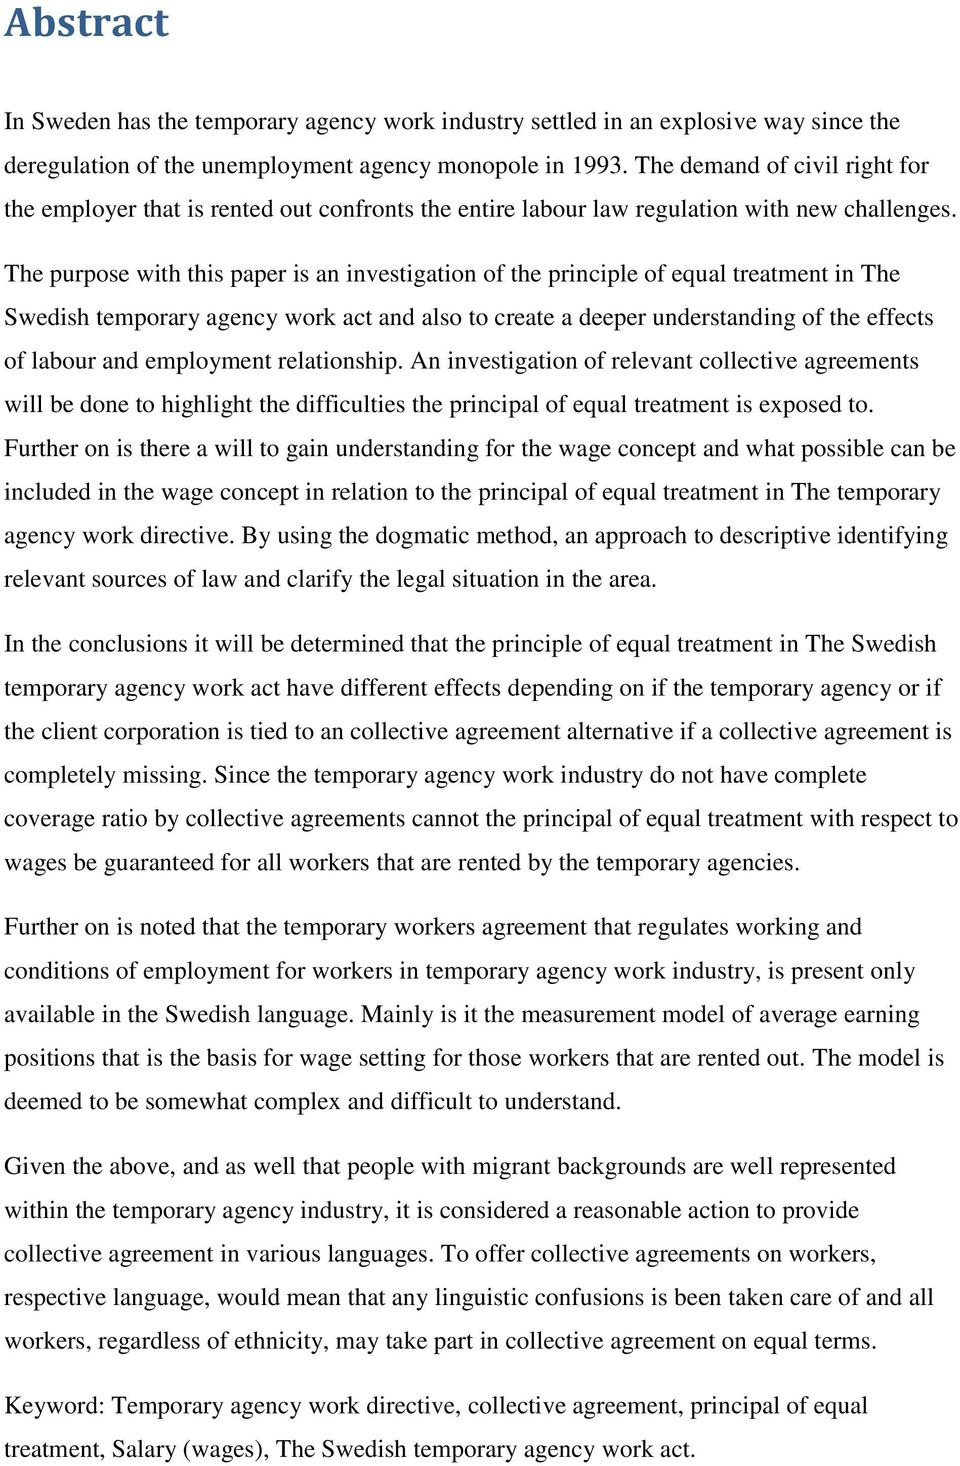 The purpose with this paper is an investigation of the principle of equal treatment in The Swedish temporary agency work act and also to create a deeper understanding of the effects of labour and